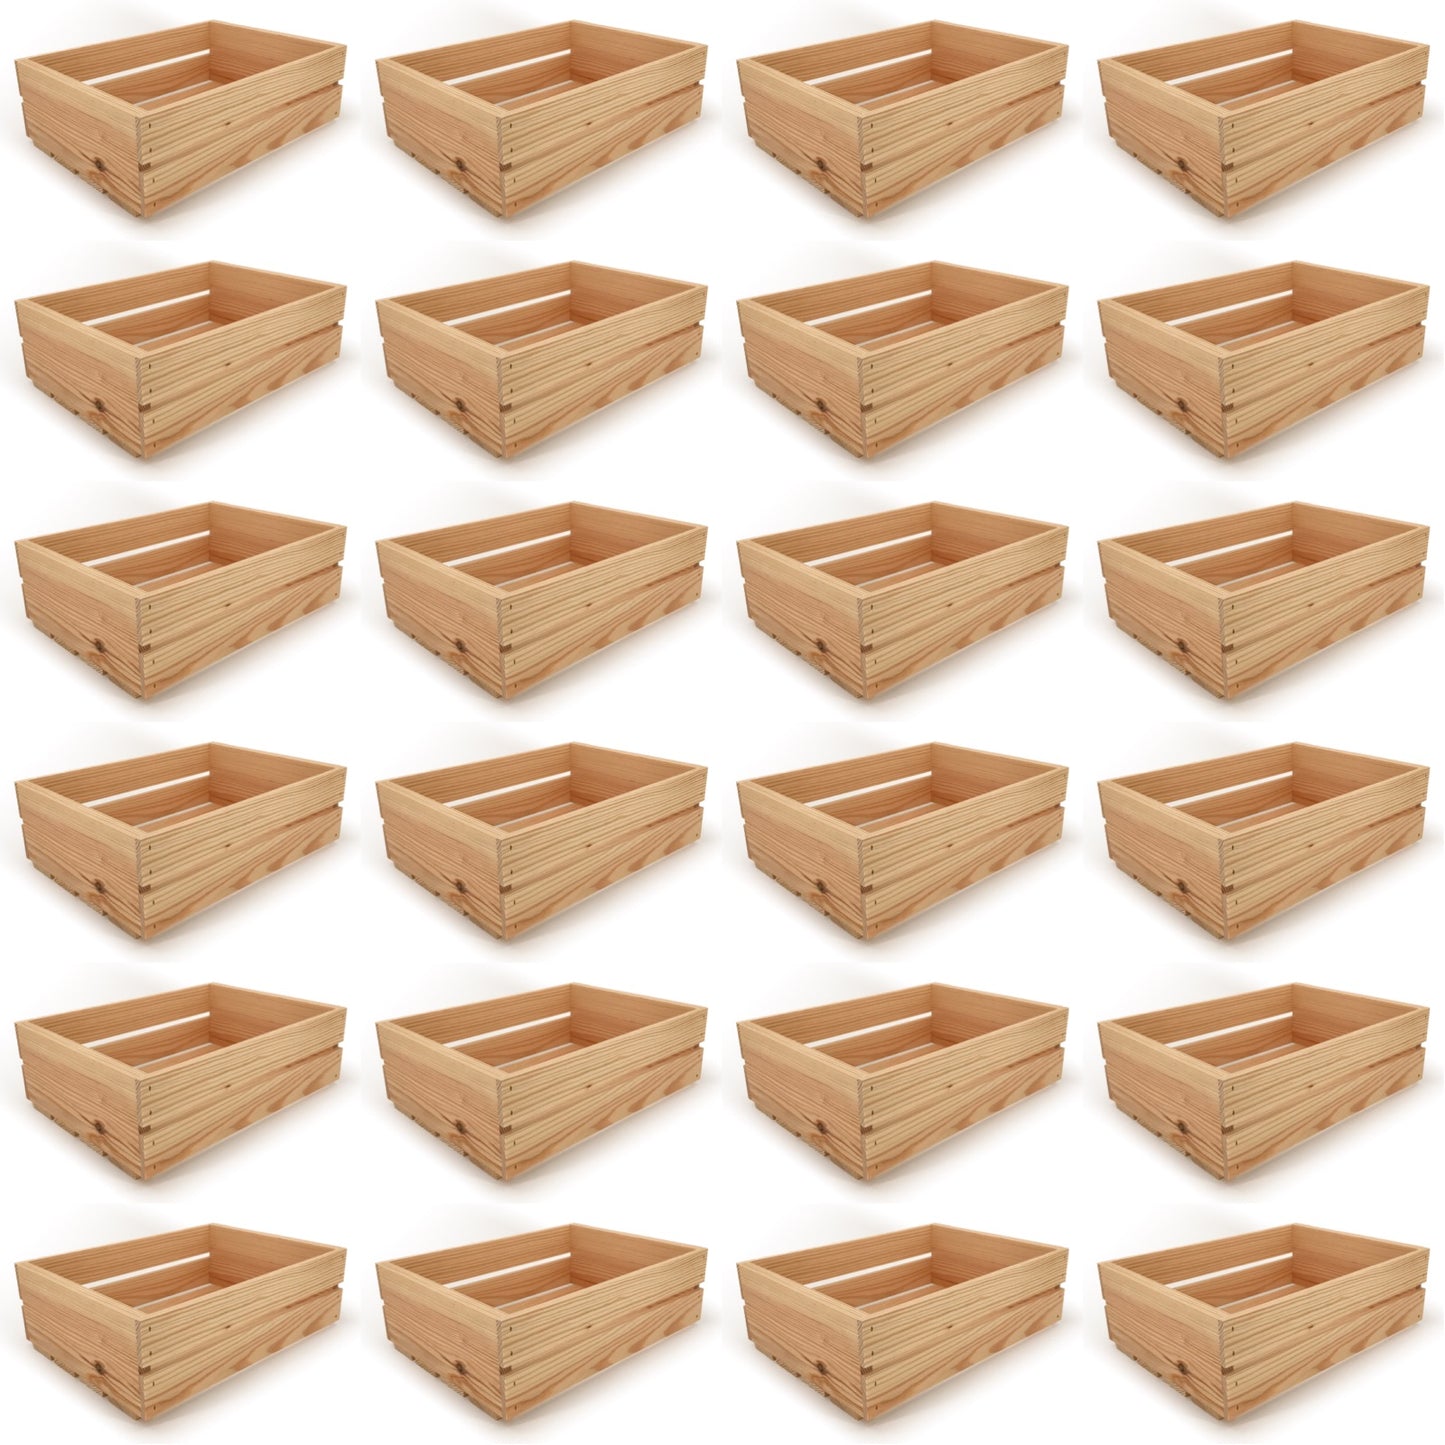 24 Small wooden crates 16x12x5.25, 6-WS-16-12-5.25-NX-NW-NL, 12-WS-16-12-5.25-NX-NW-NL, 24-WS-16-12-5.25-NX-NW-NL, 48-WS-16-12-5.25-NX-NW-NL, 96-WS-16-12-5.25-NX-NW-NL